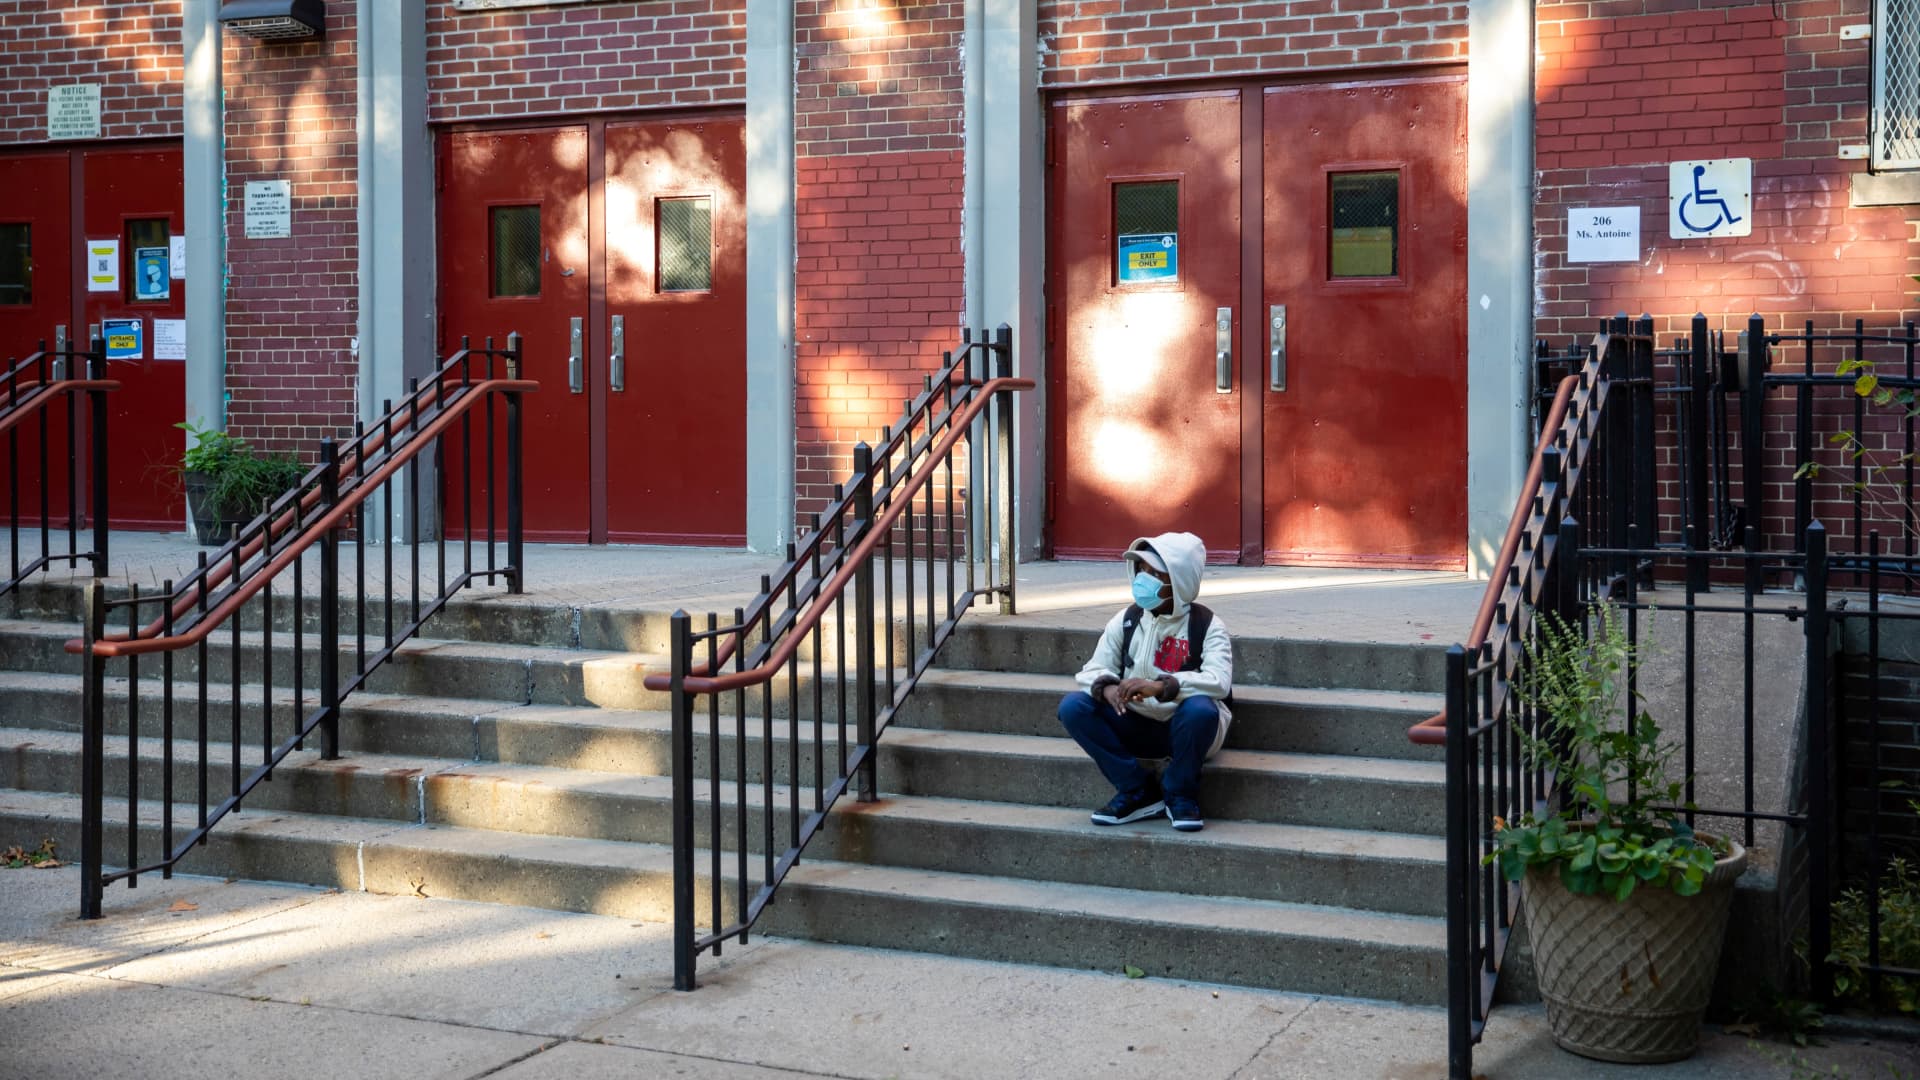 A student is seen on the steps of the closed public school PS 139 in the Ditmas Park neighborhood in Brooklyn of New York, the United States, Oct. 8, 2020.